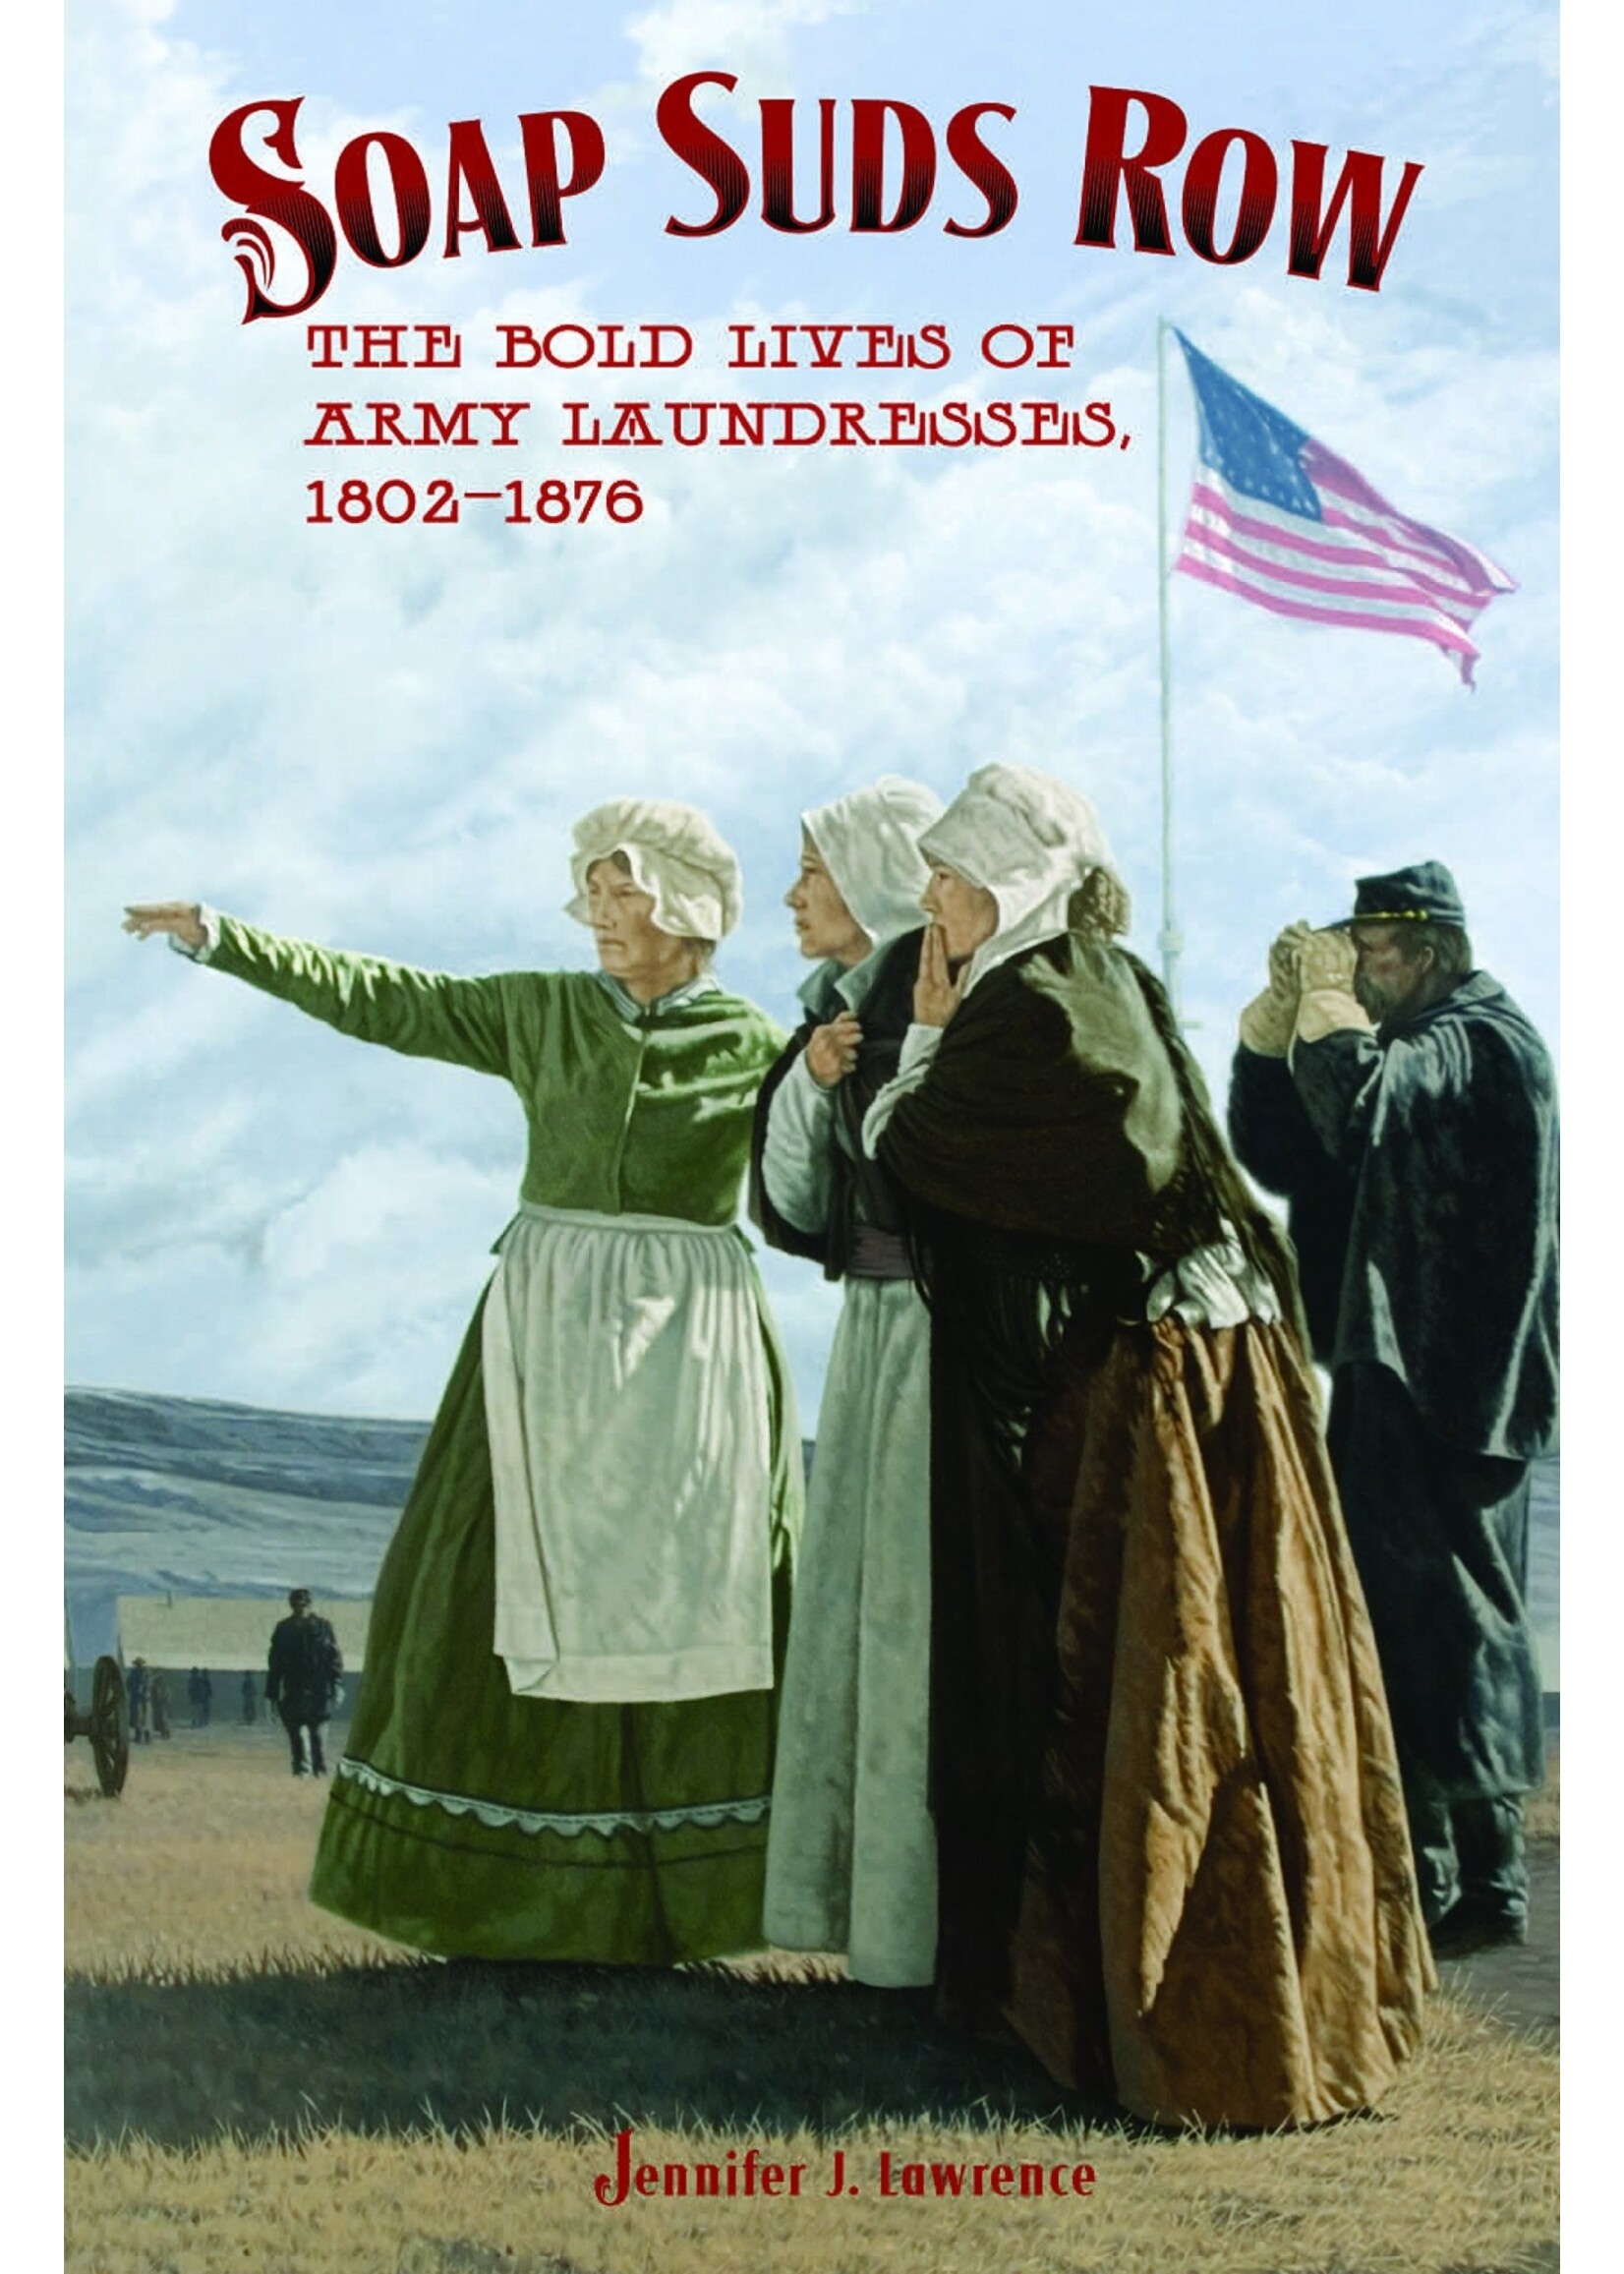 Soap Suds Row: The Bold Lives of Army Laundresses 1802-1876